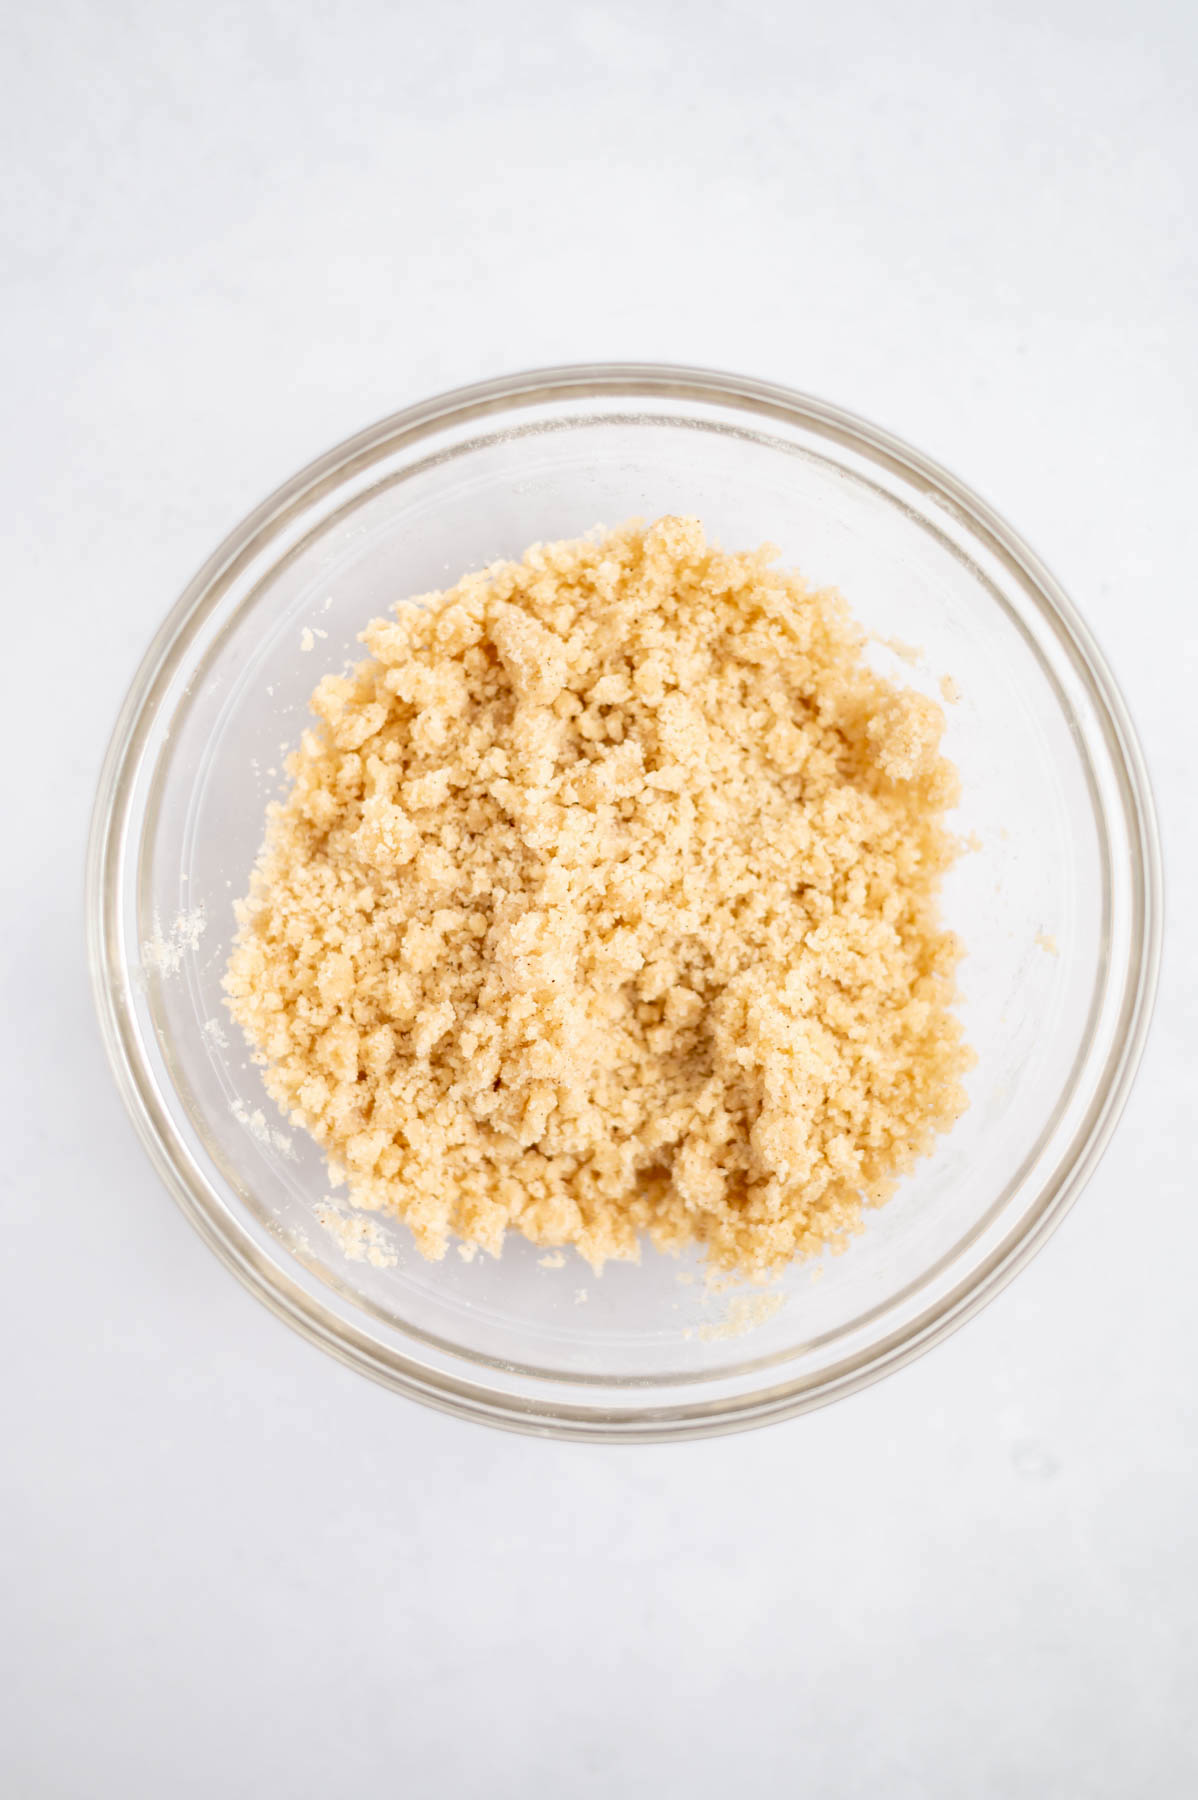 crumble mixture in a bowl